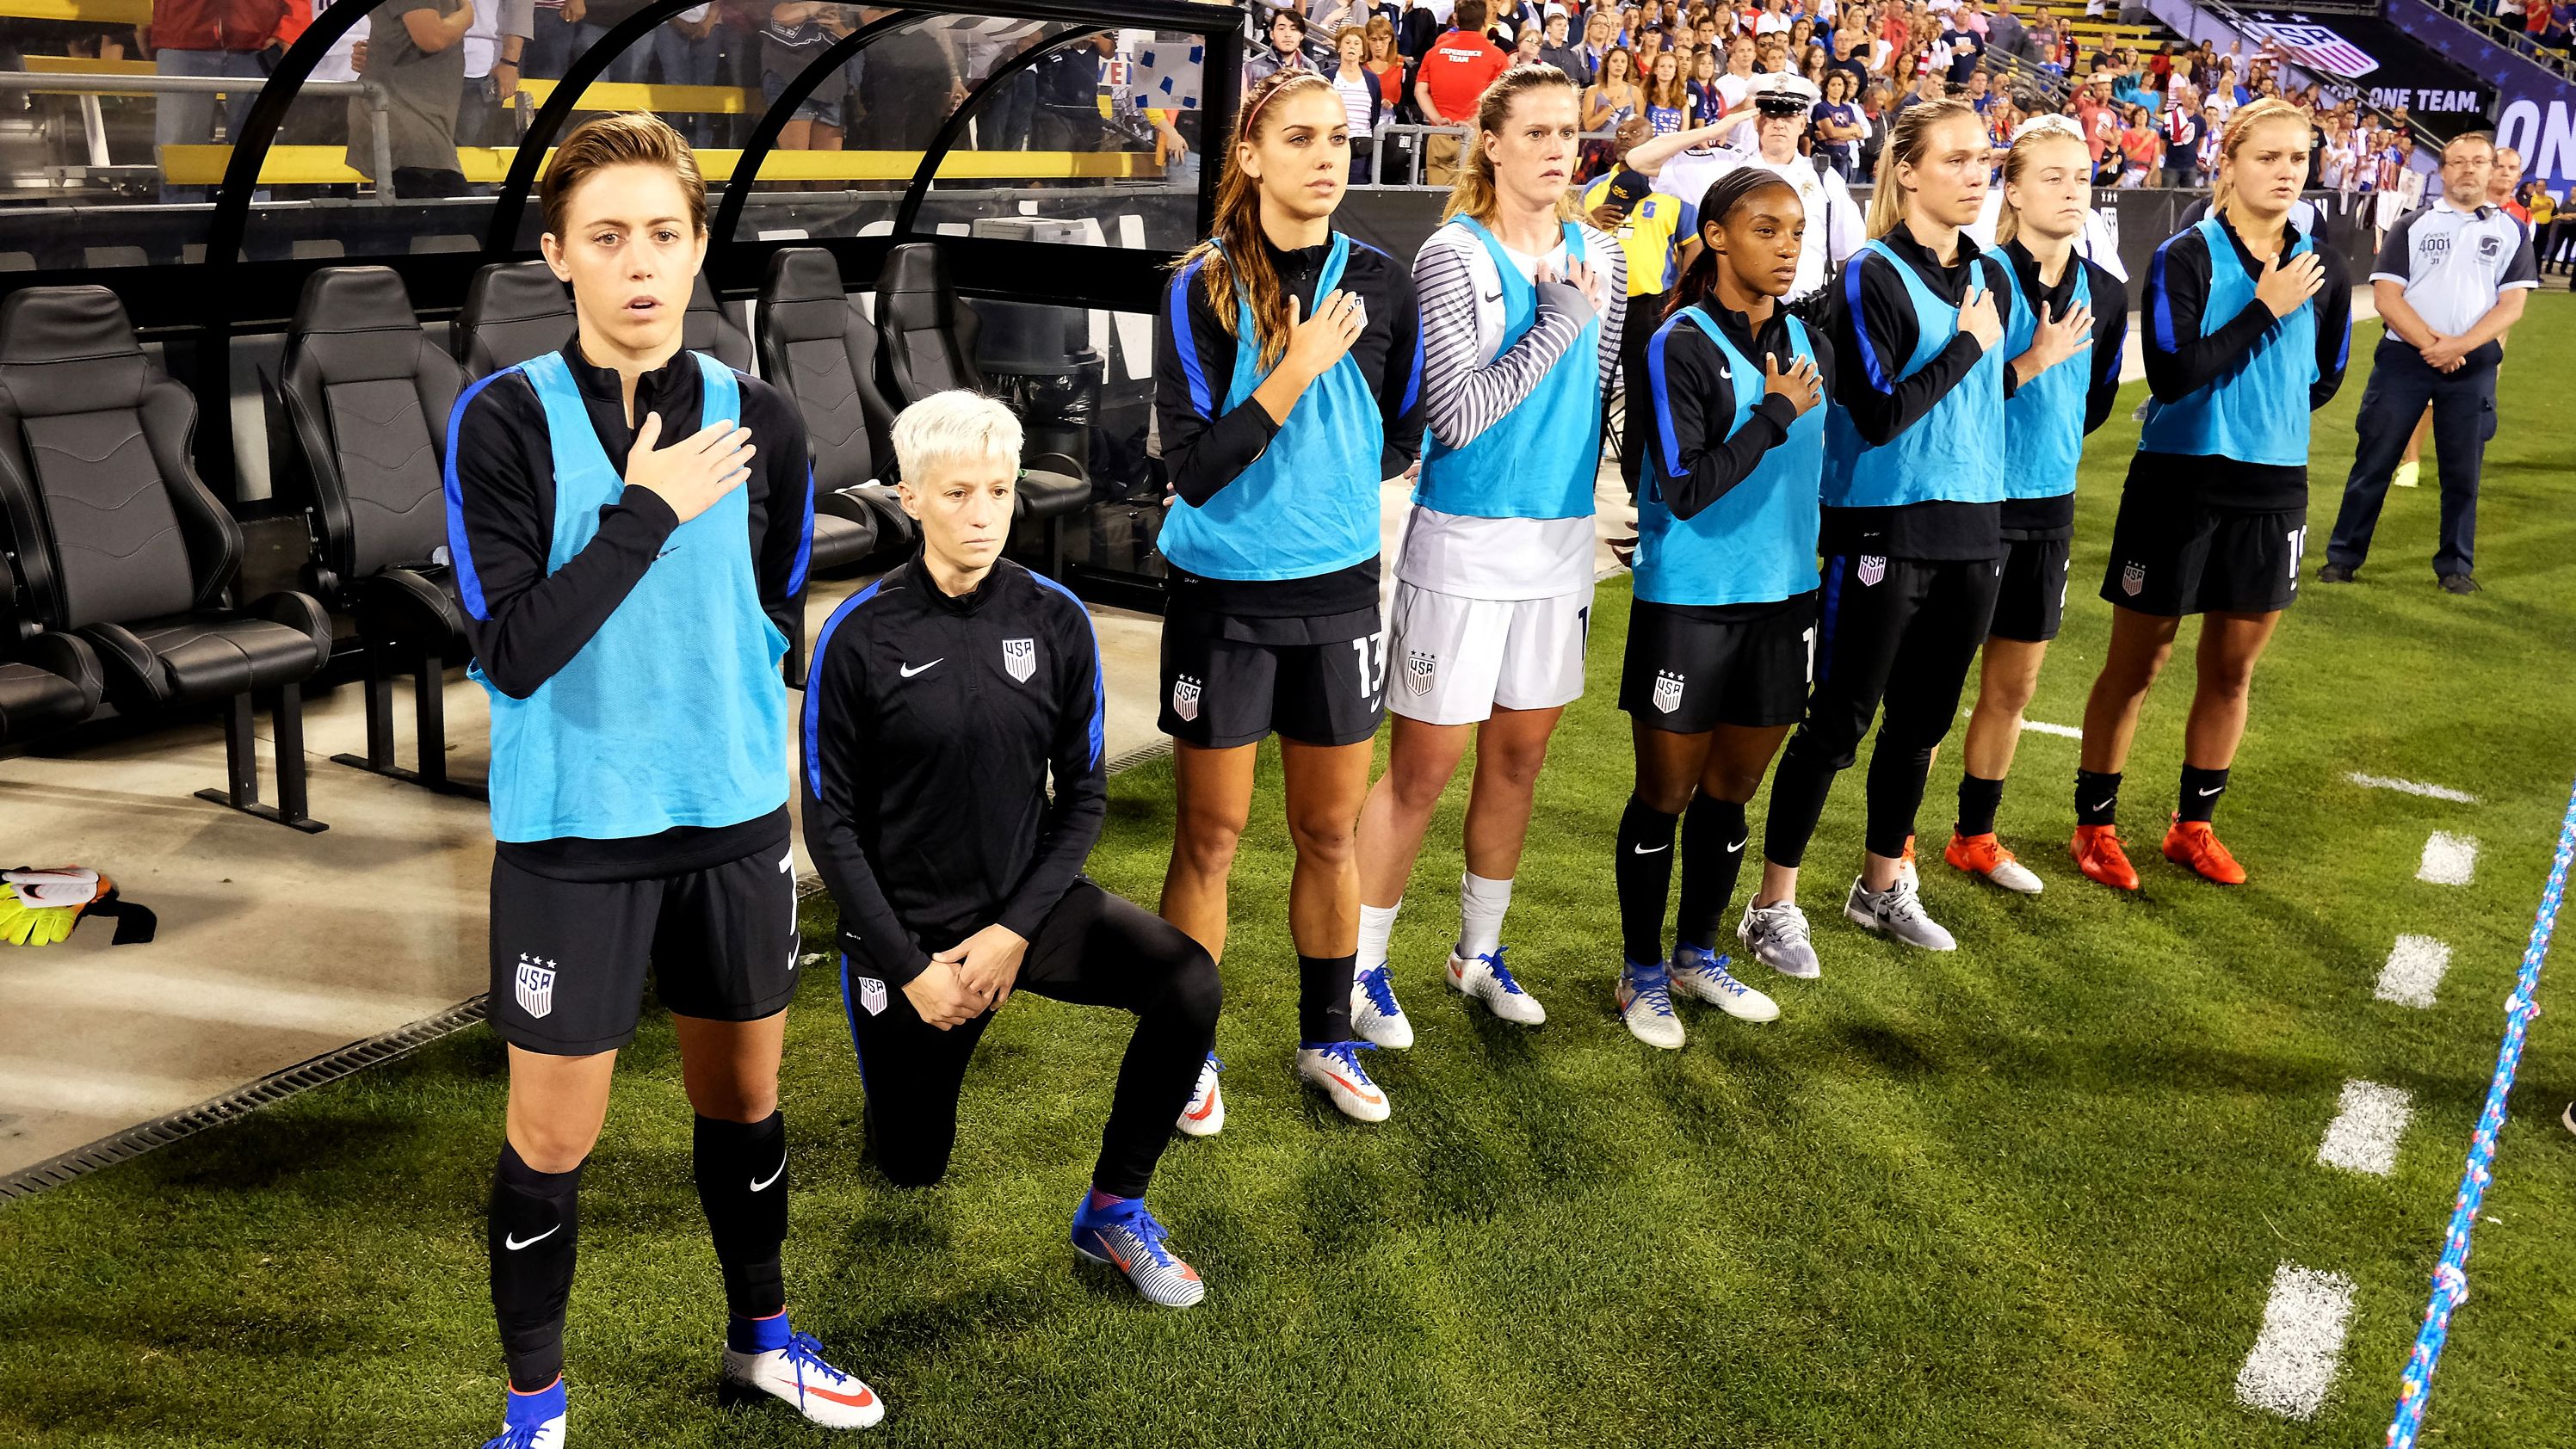 Megan Rapinoe of the US Women's National Team kneels during the playing of the US National Anthem before a match against Thailand on September 15, 2016, at MAPFRE Stadium in Columbus, Ohio.  